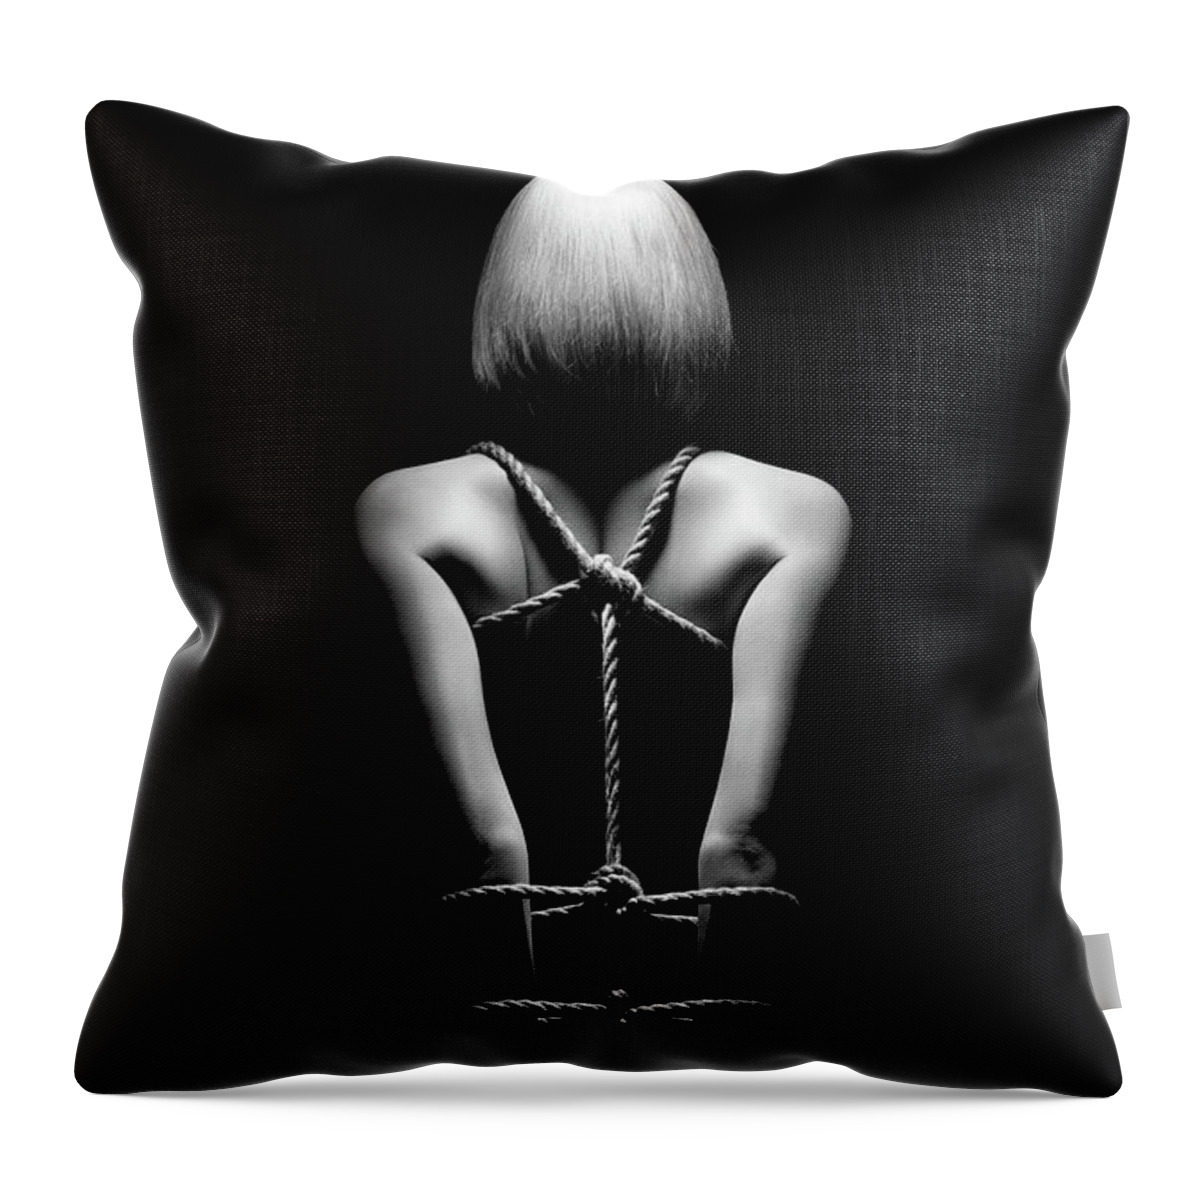 Woman Throw Pillow featuring the photograph Nude Woman bondage 7 by Johan Swanepoel